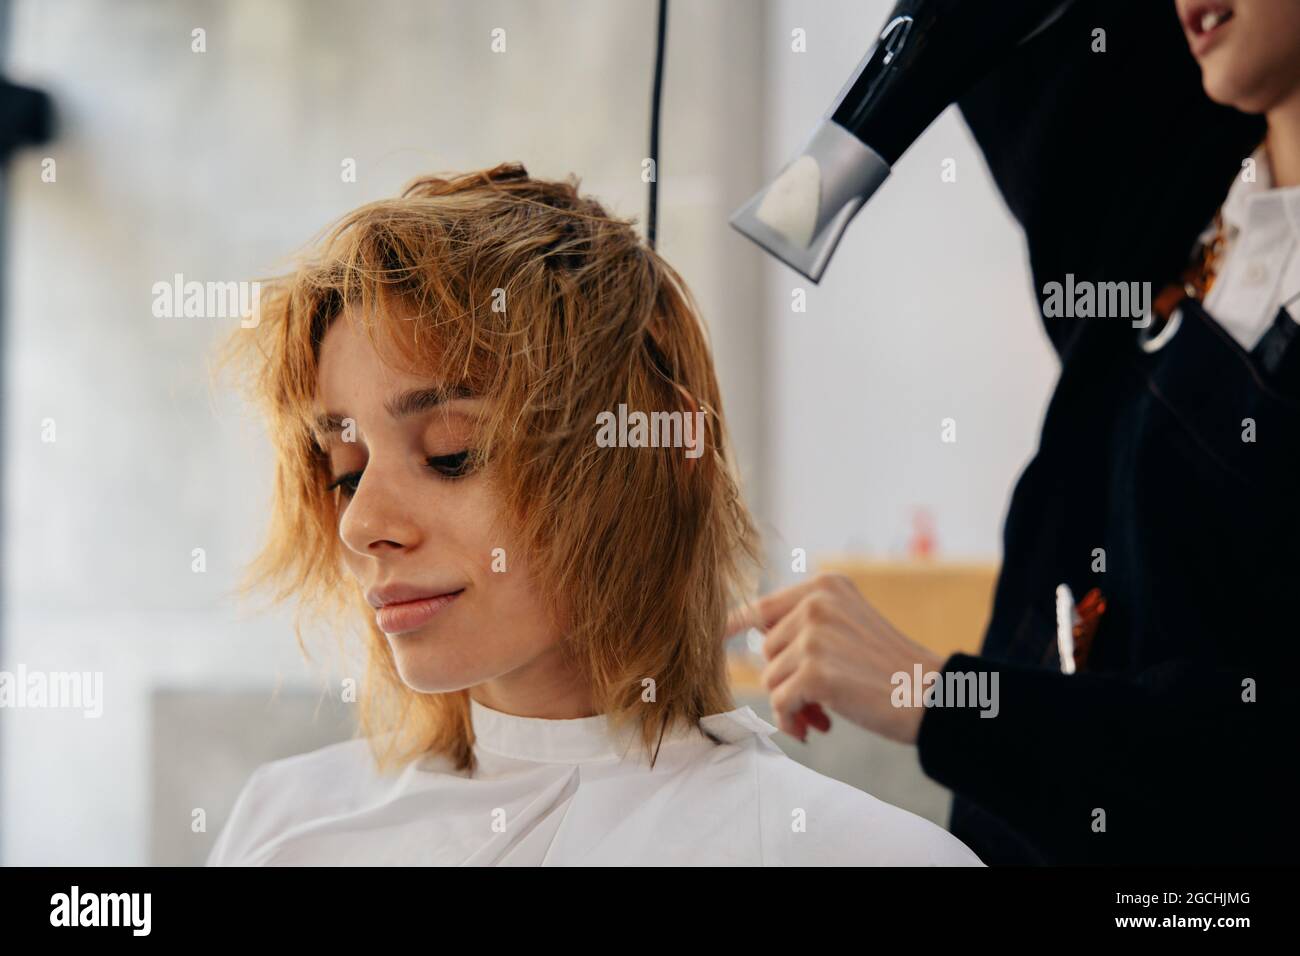 Young male Asian hairdresser wearing apron drying handsome young man's hair in a modern barber shop while concentrating on work Stock Photo